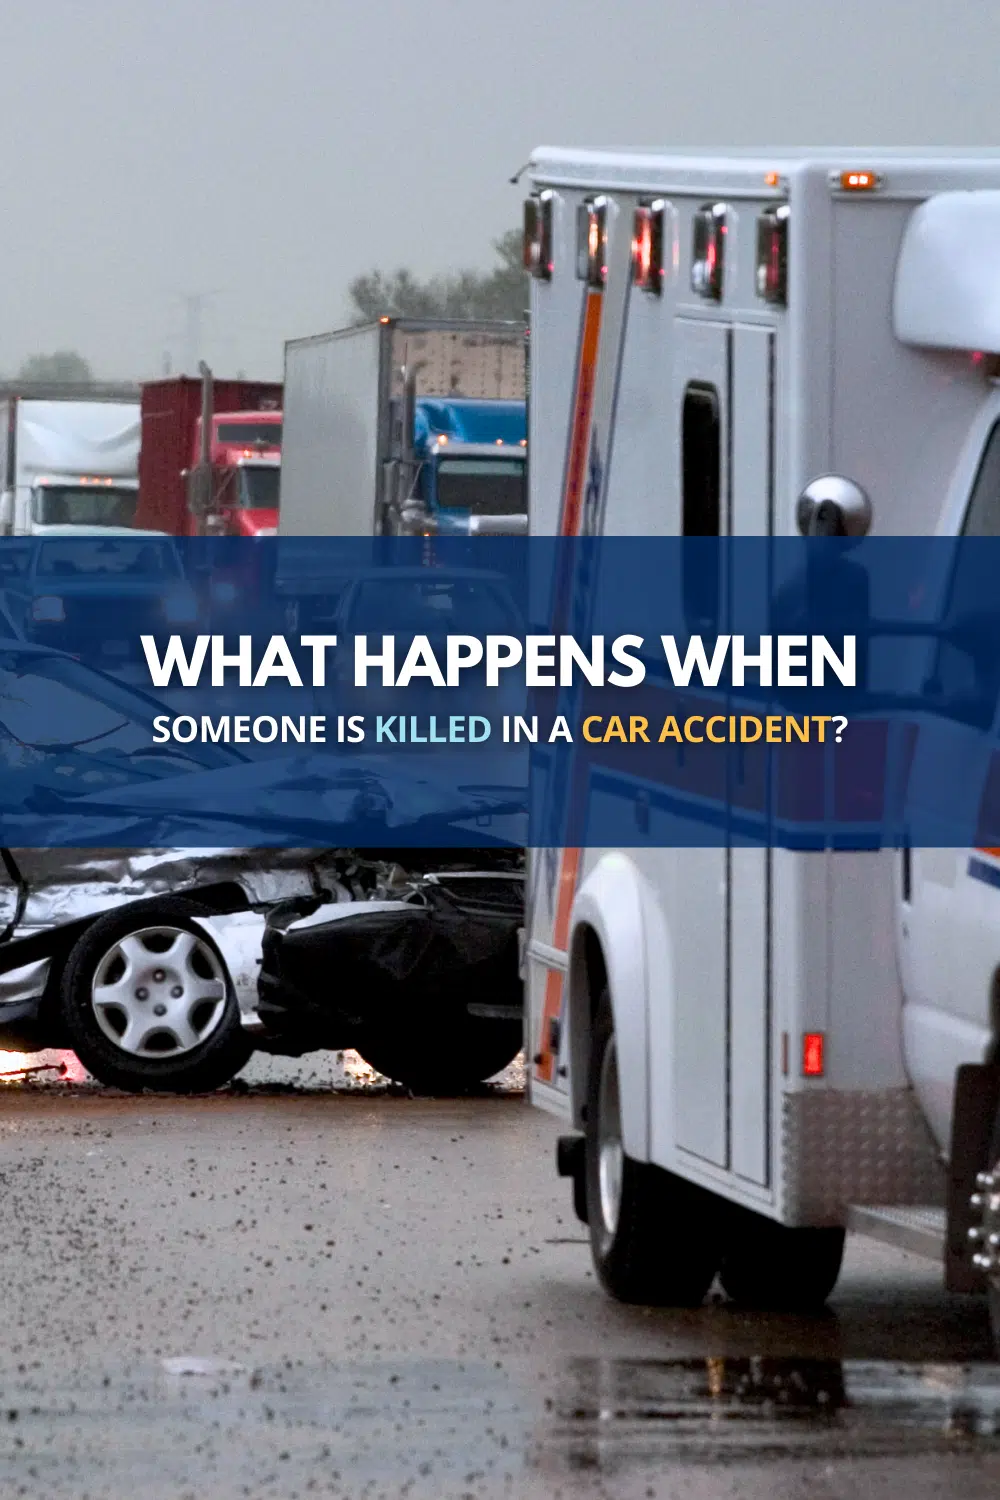 What Happens When Someone Is Killed In A Car Accident?